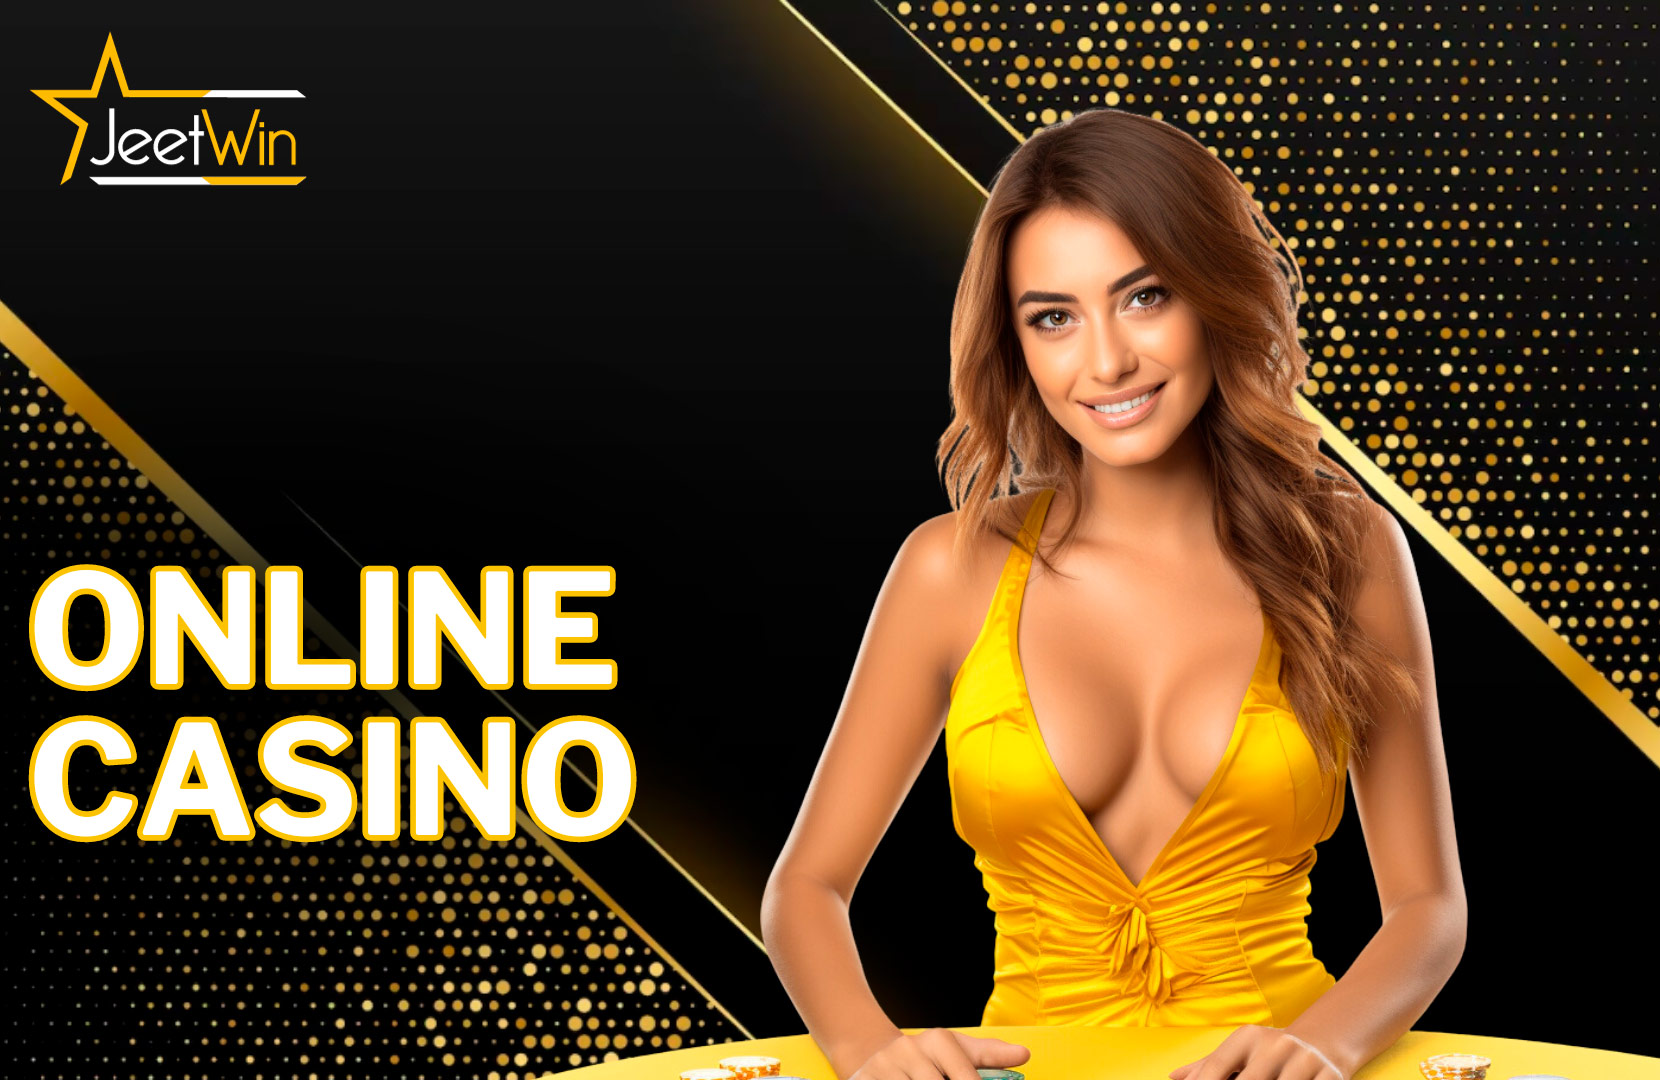 Experience the Thrills of Jeetwin Online Casino